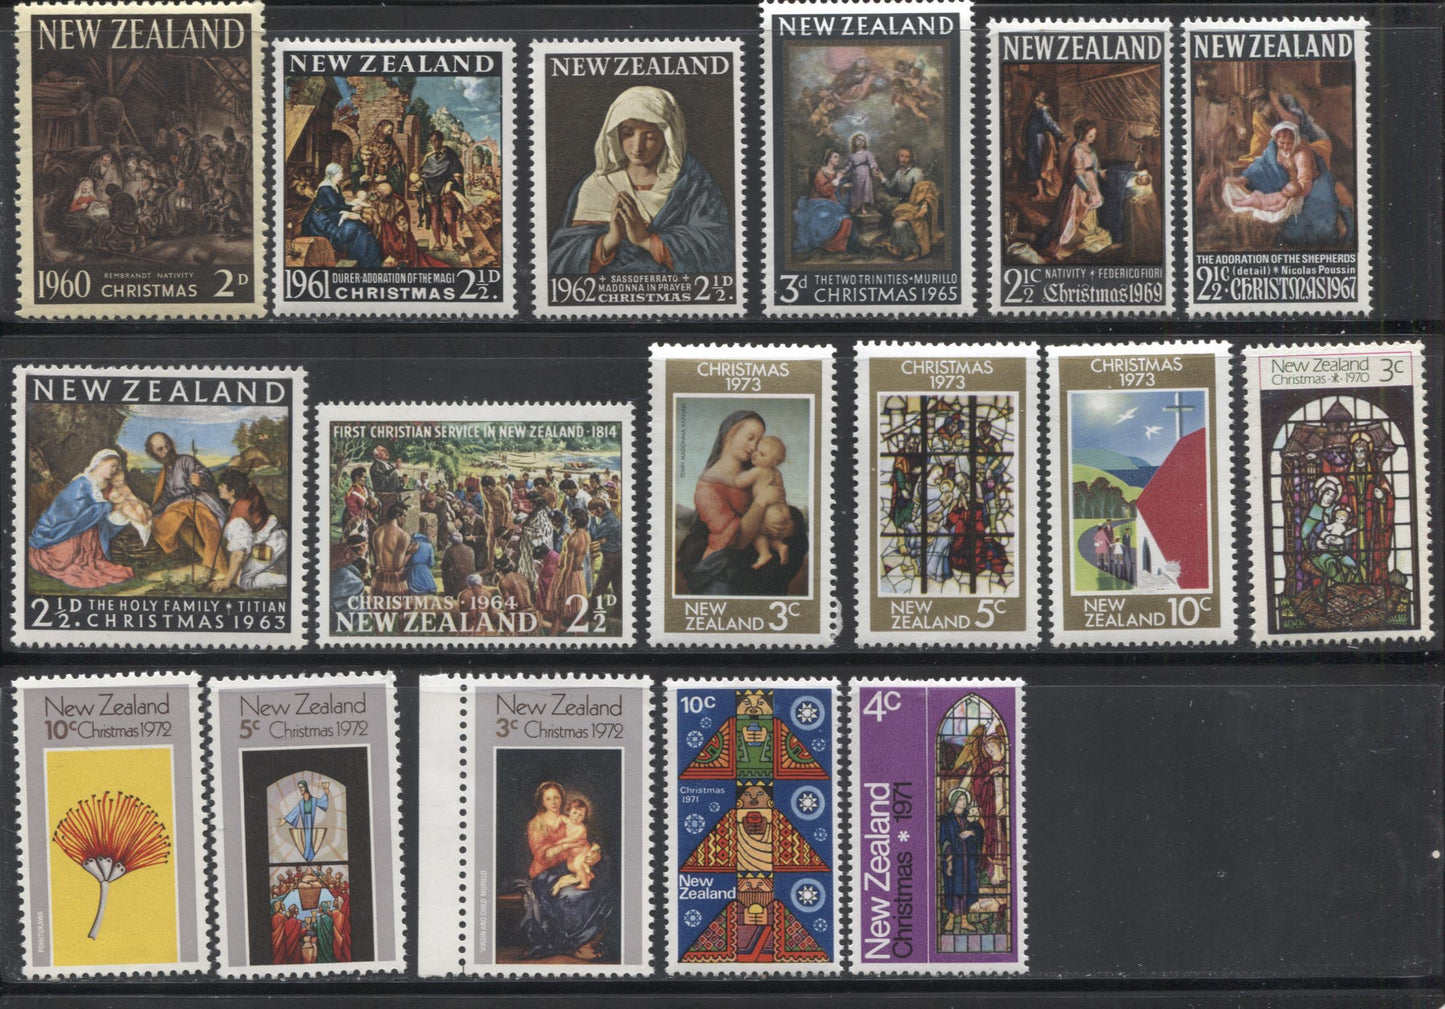 Lot 260 New Zealand, 1960 to 1973 Christmas Issues, A Small Selection of 11 VFNH Sets